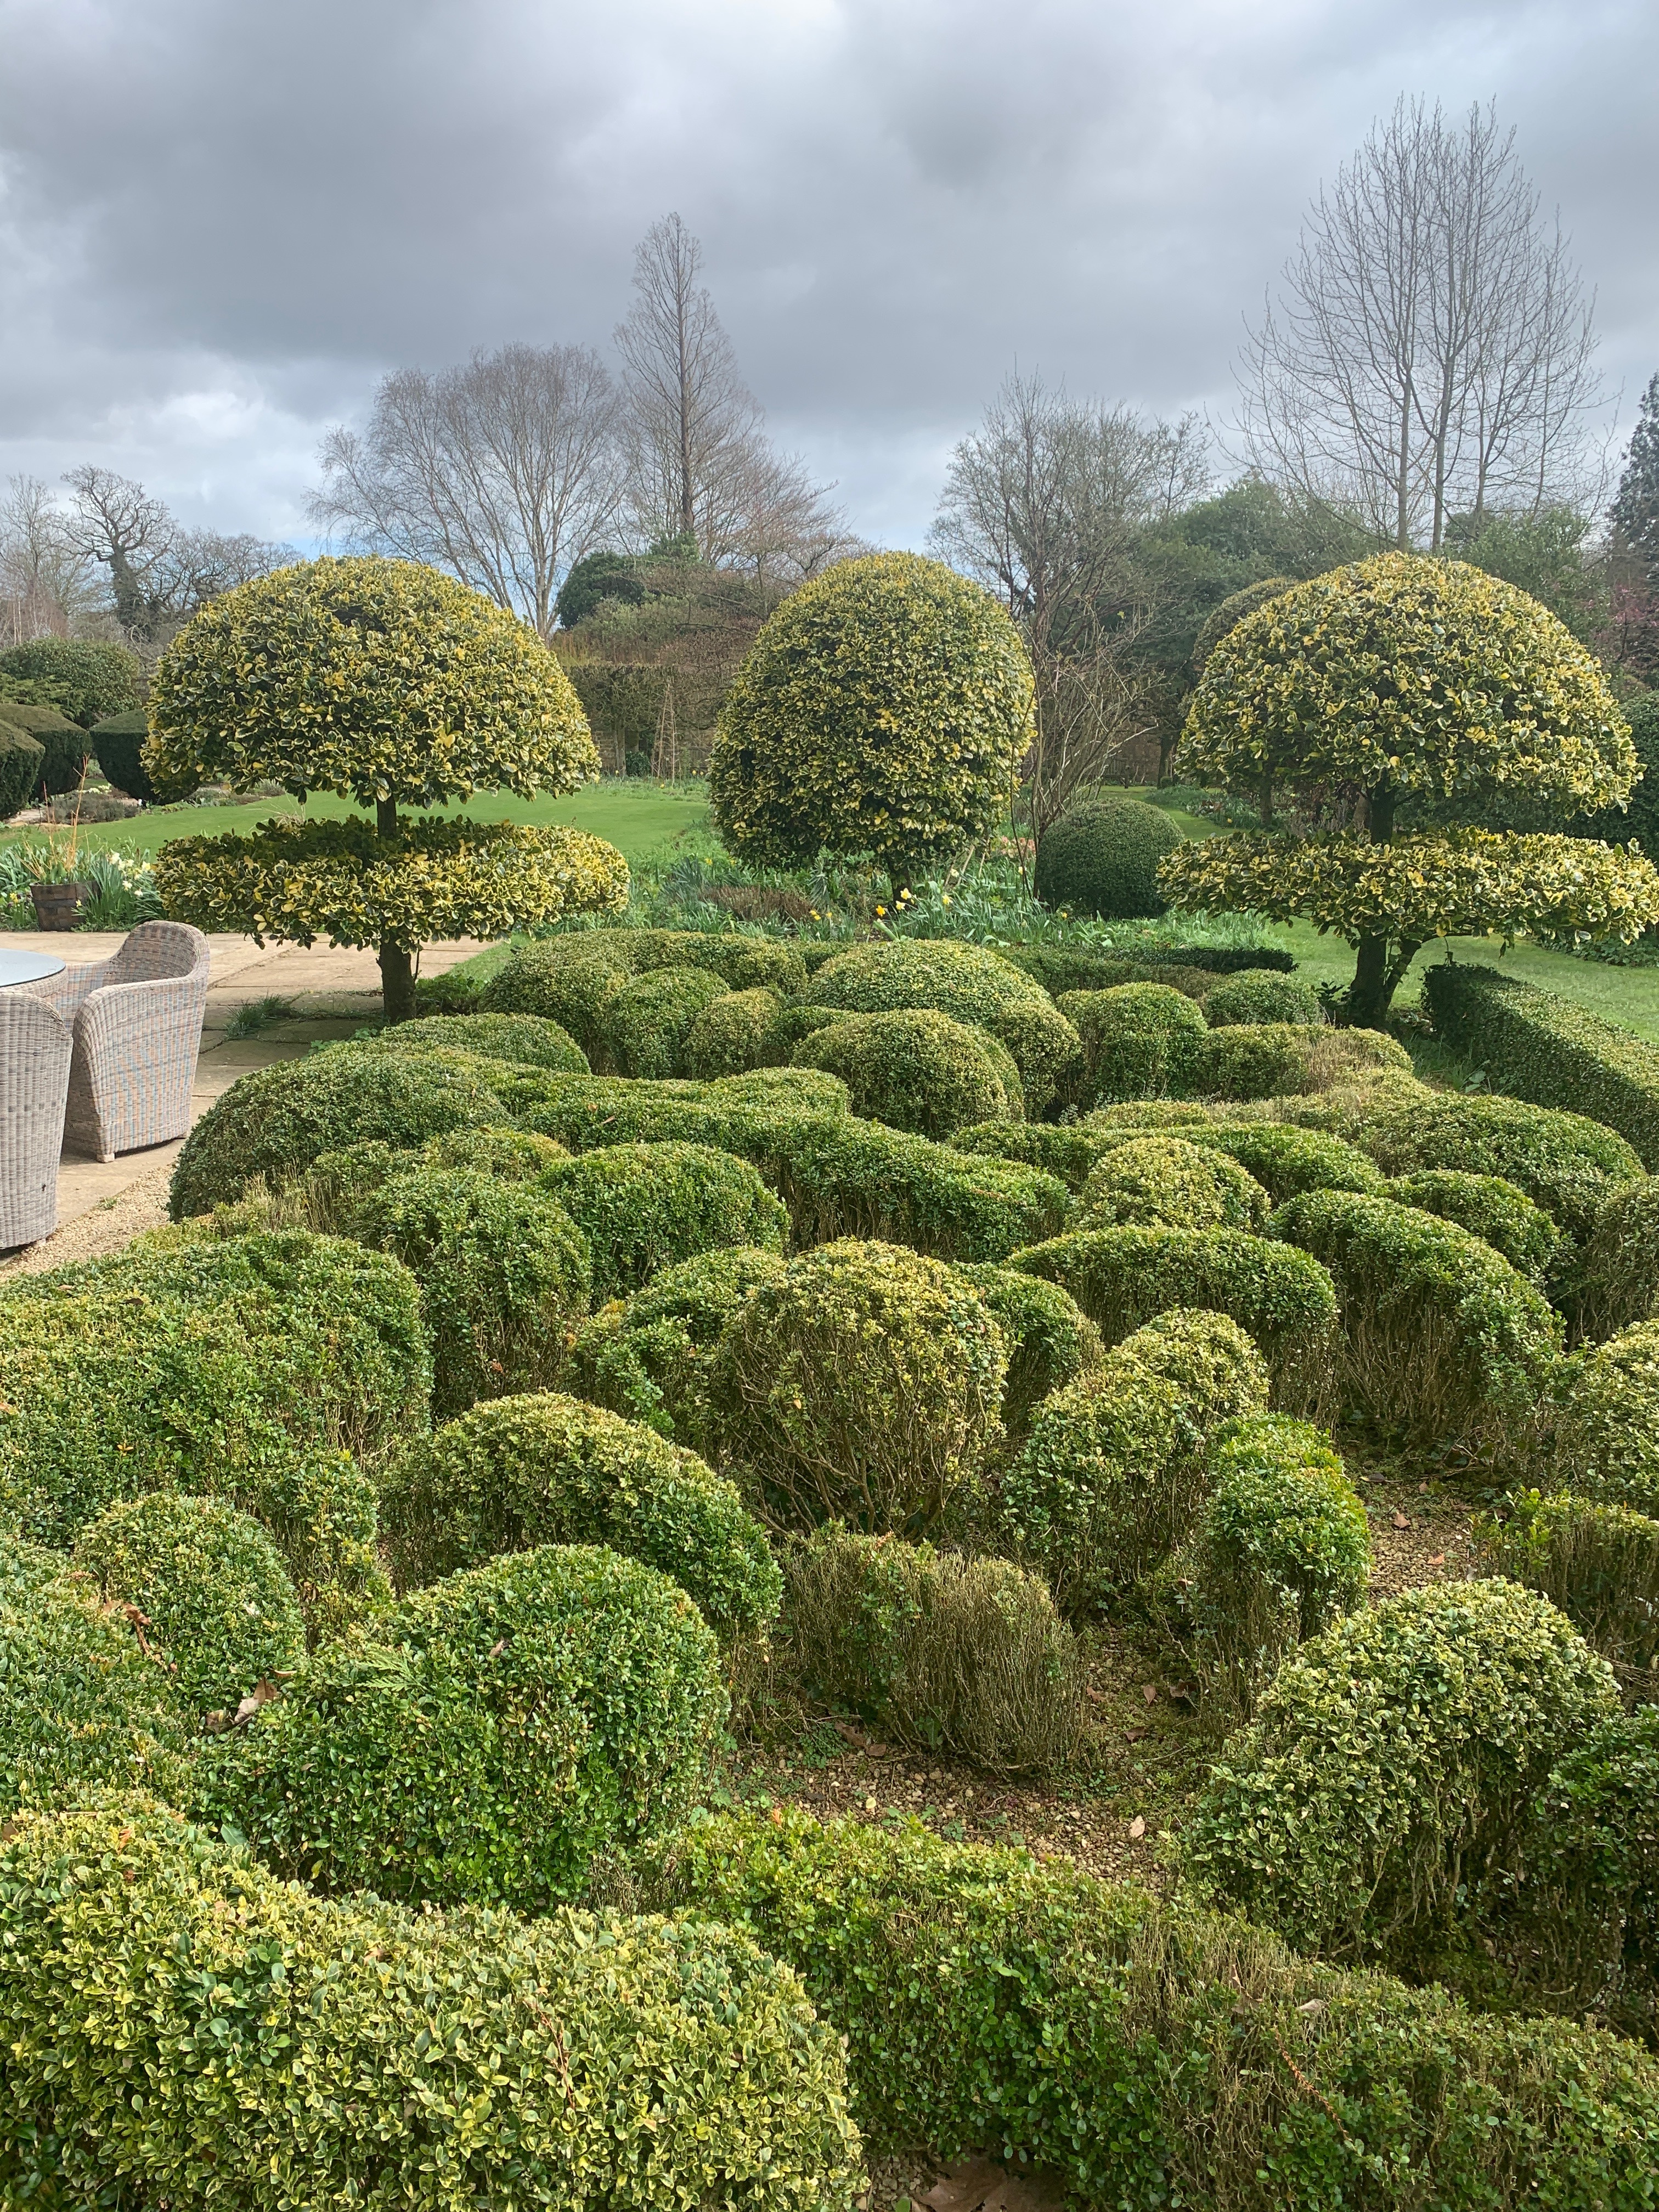 Cotswolds photo by Christina Dandar for The Potted Boxwood. 12